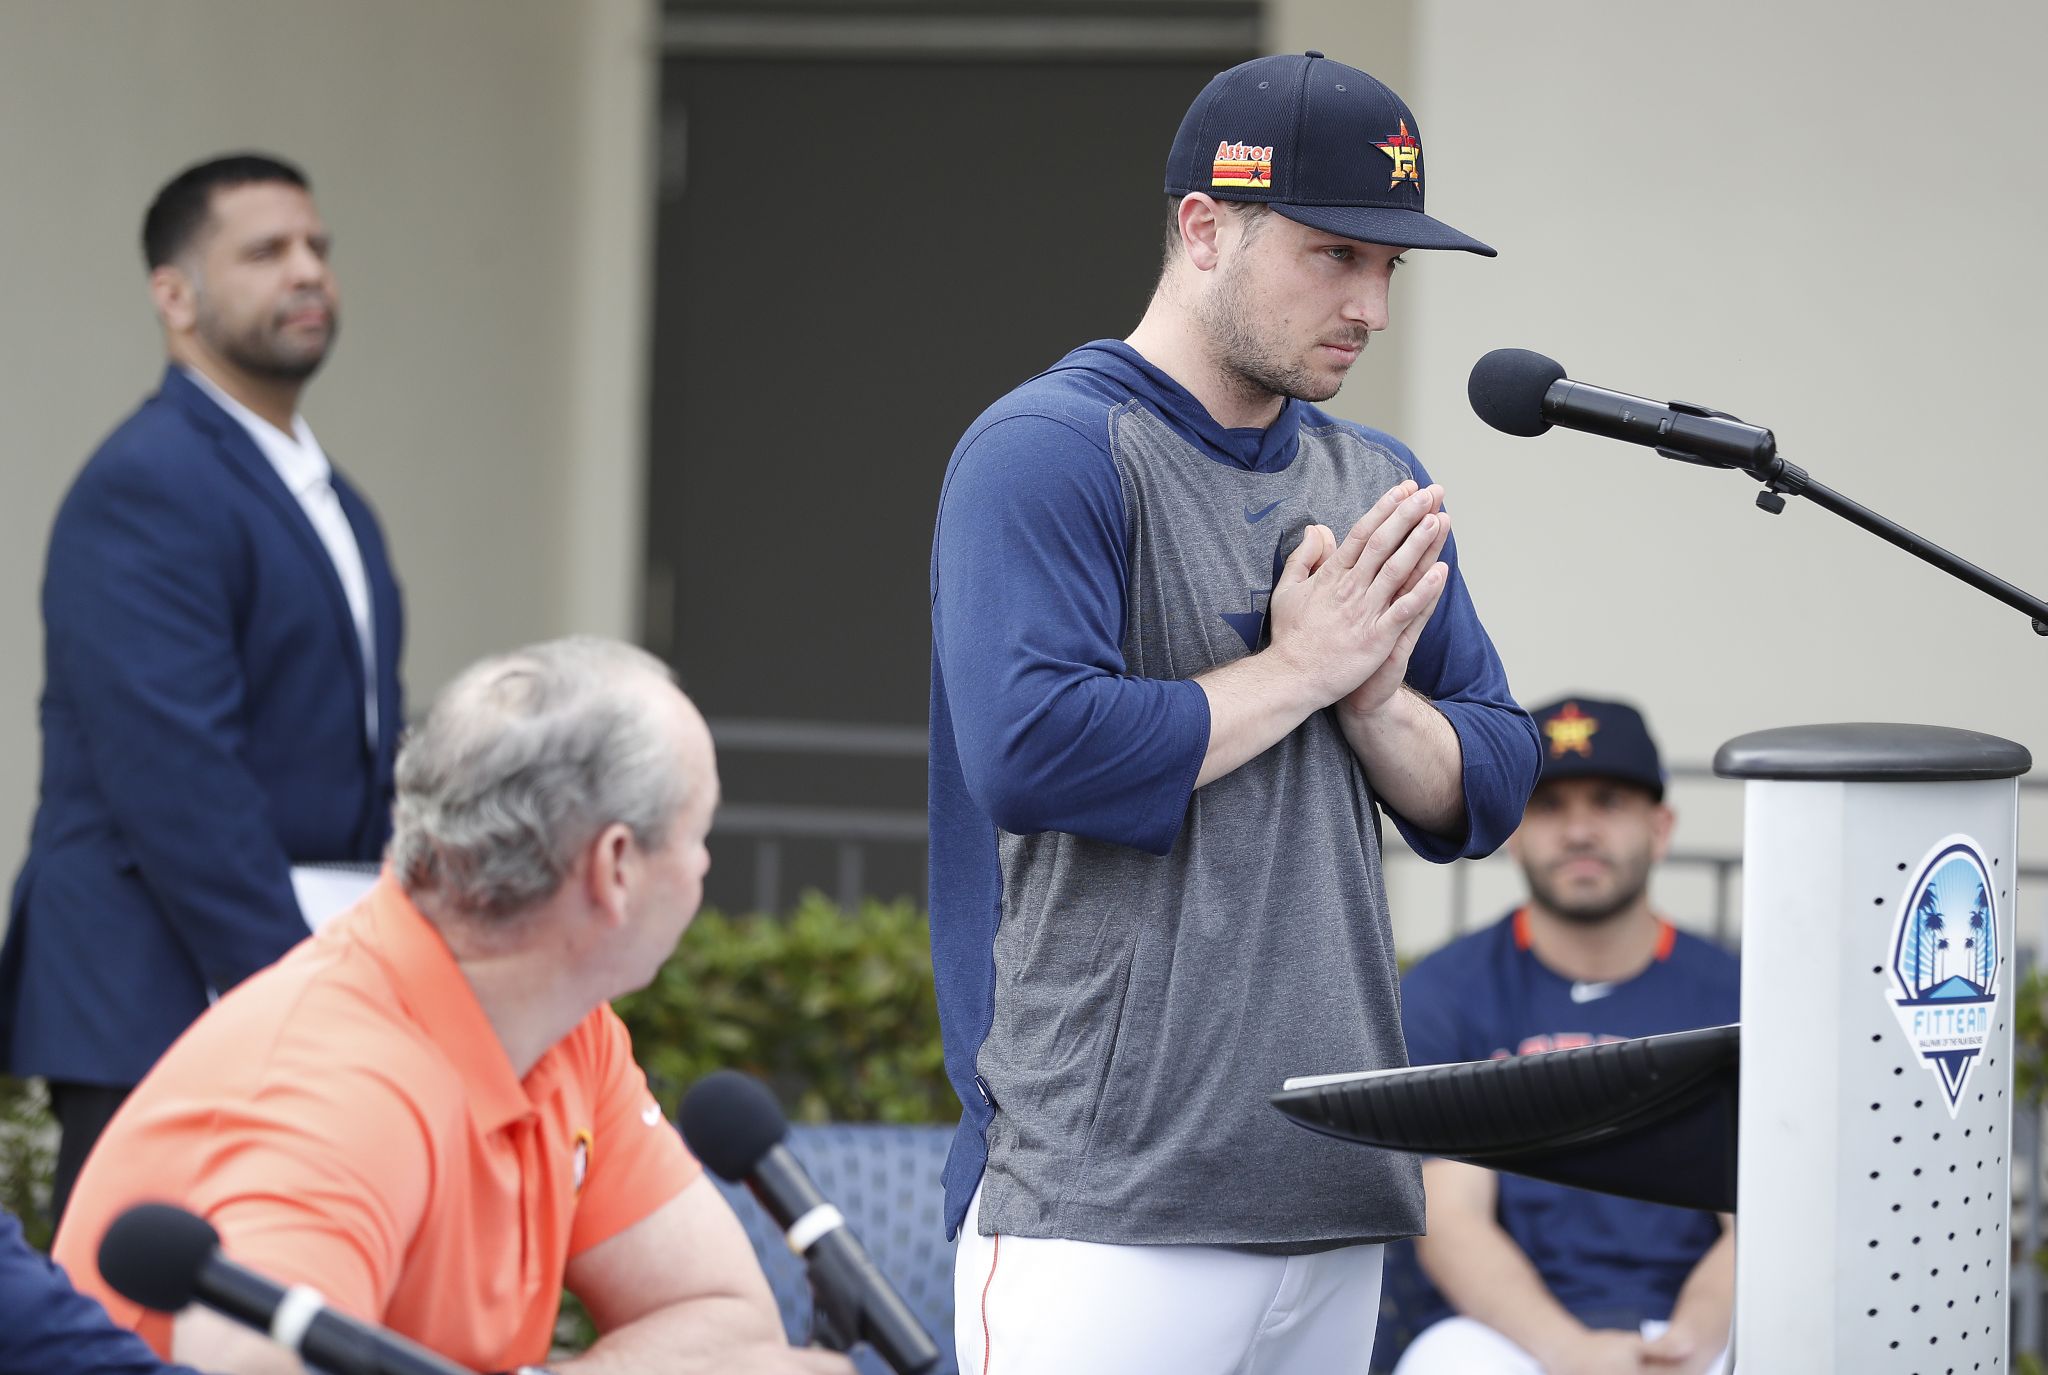 Astros stars issue public apology for cheating scandal